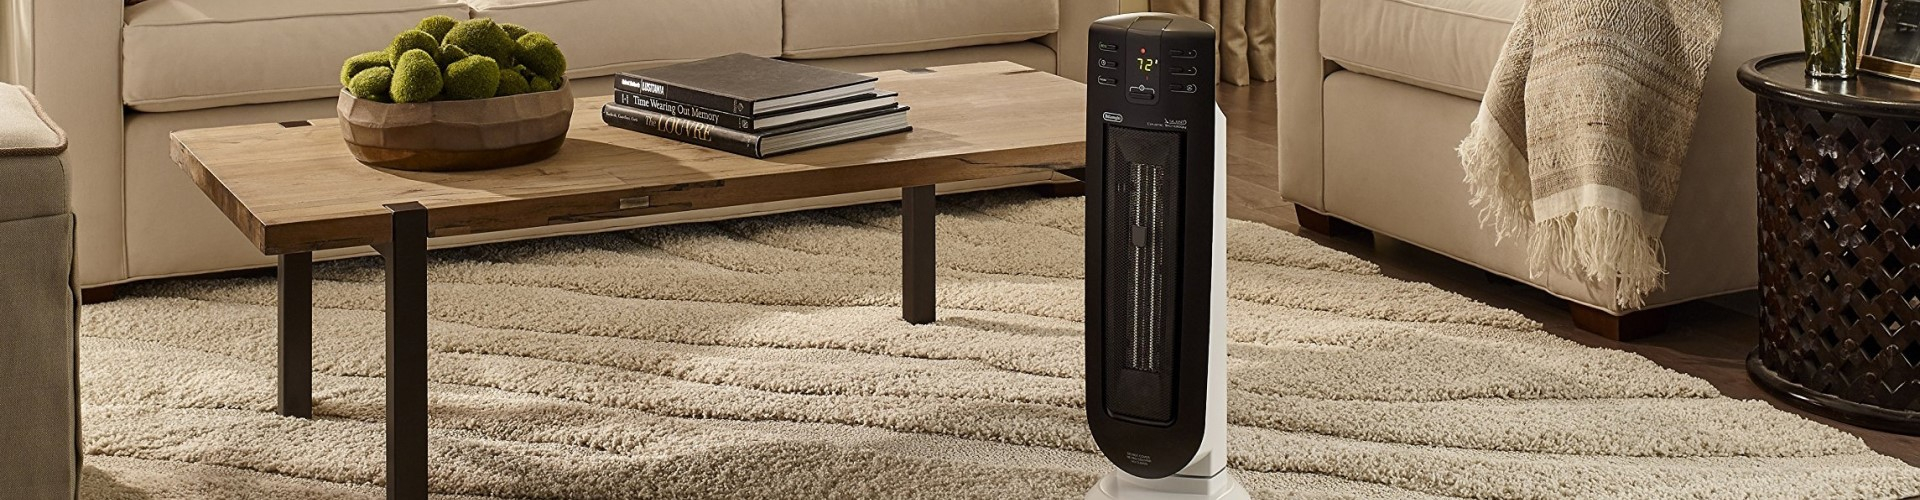 8 Best Ceramic Heaters Reviewed In Detail Apr 2020 with dimensions 1920 X 500